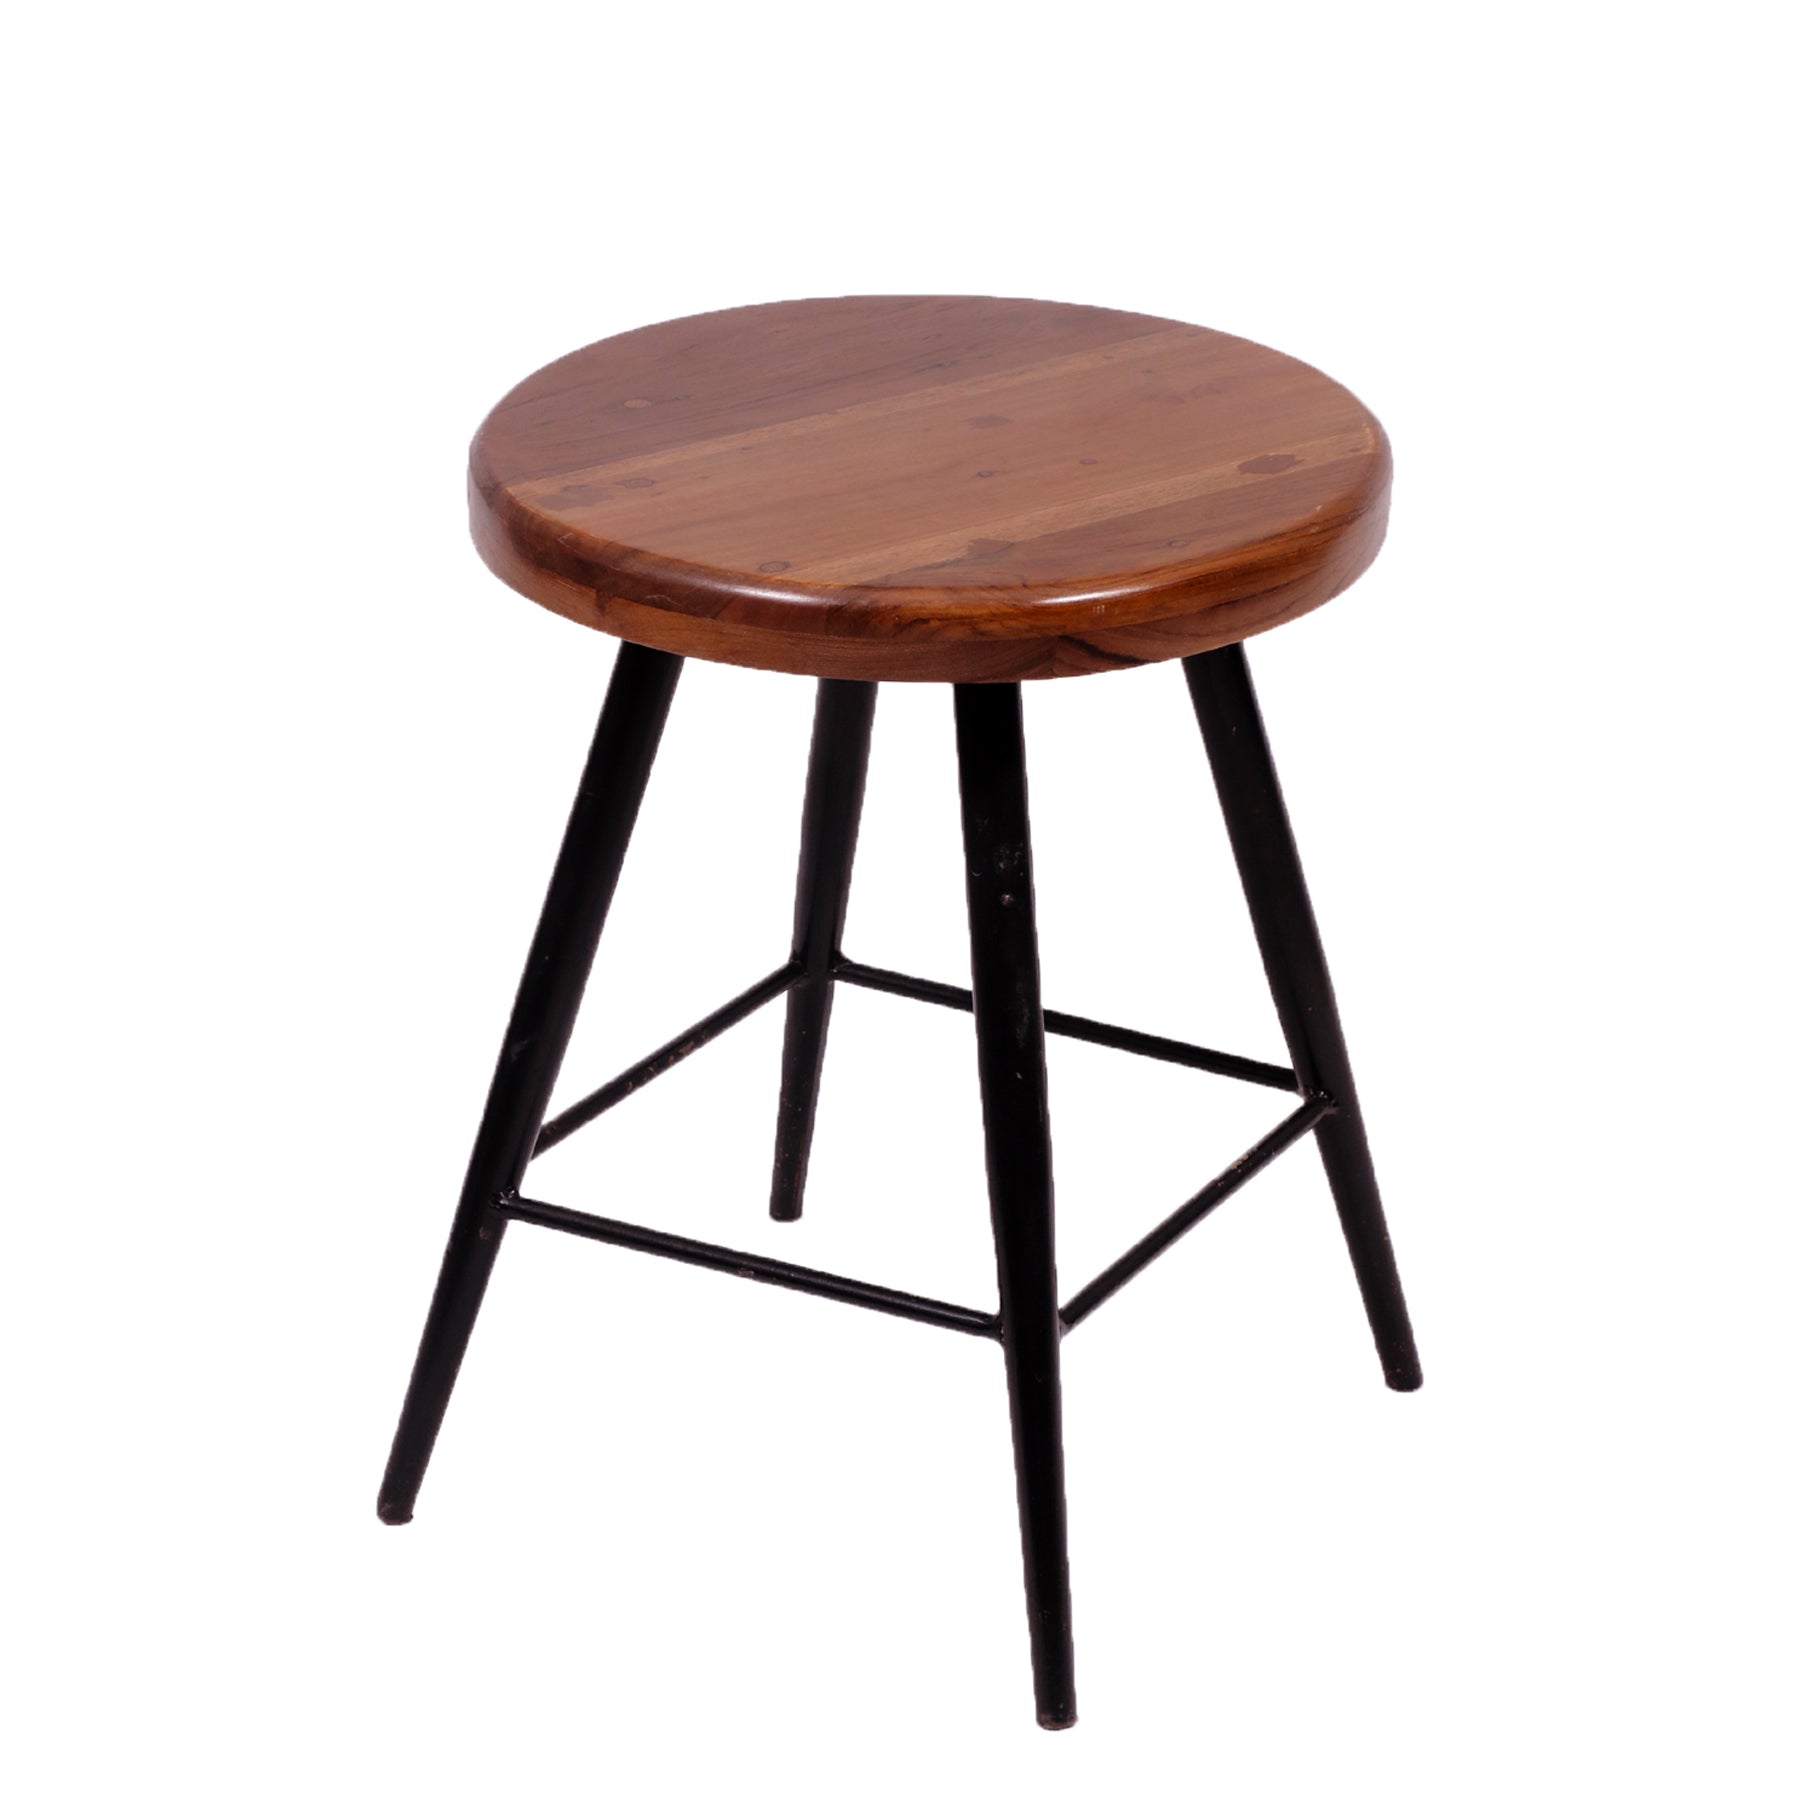 Rounded Stool with Cool Legs Stool